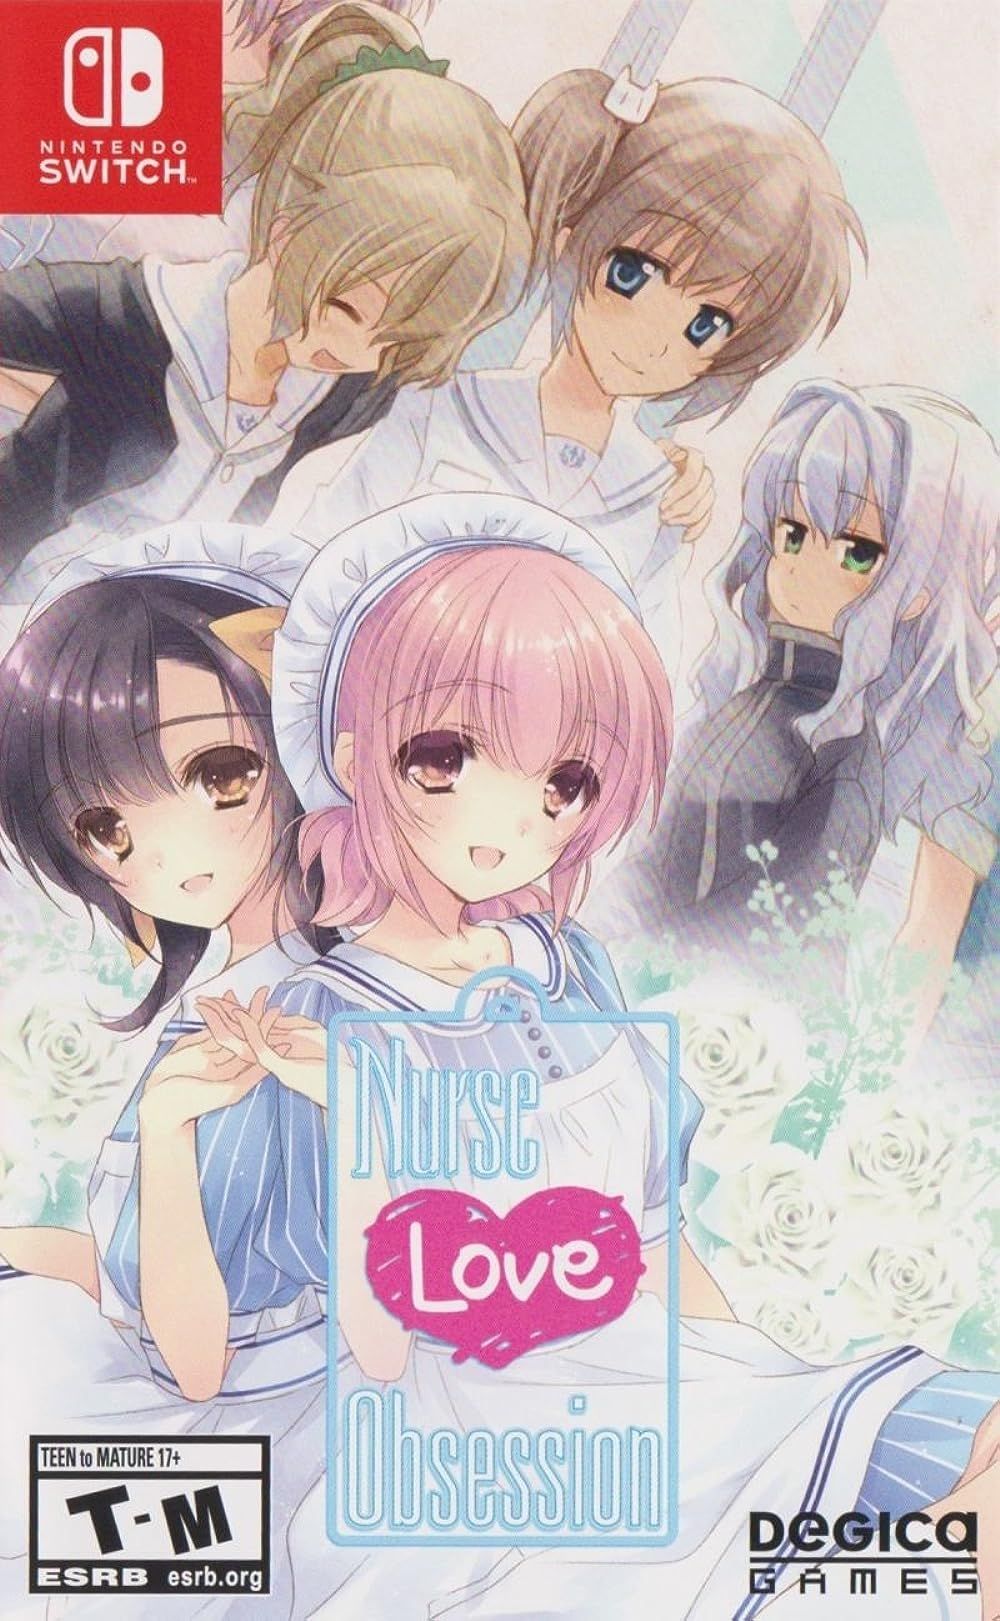 Nurse Love Obsession Video Game